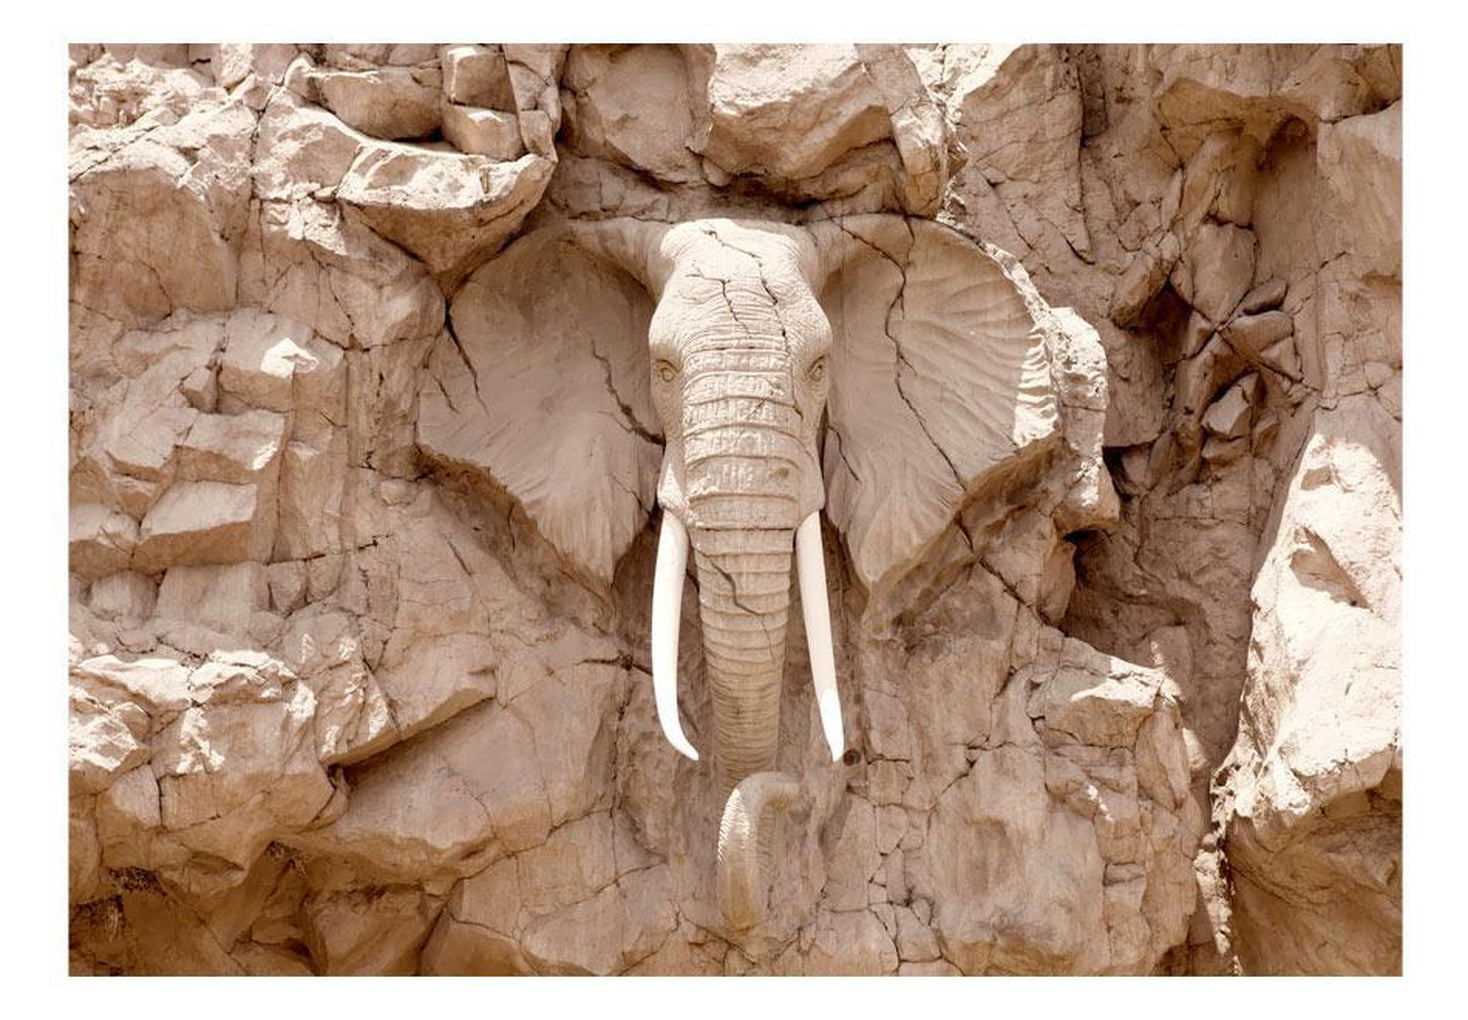 Landscape Wall Mural - Elephant Carving South Africa-Tiptophomedecor